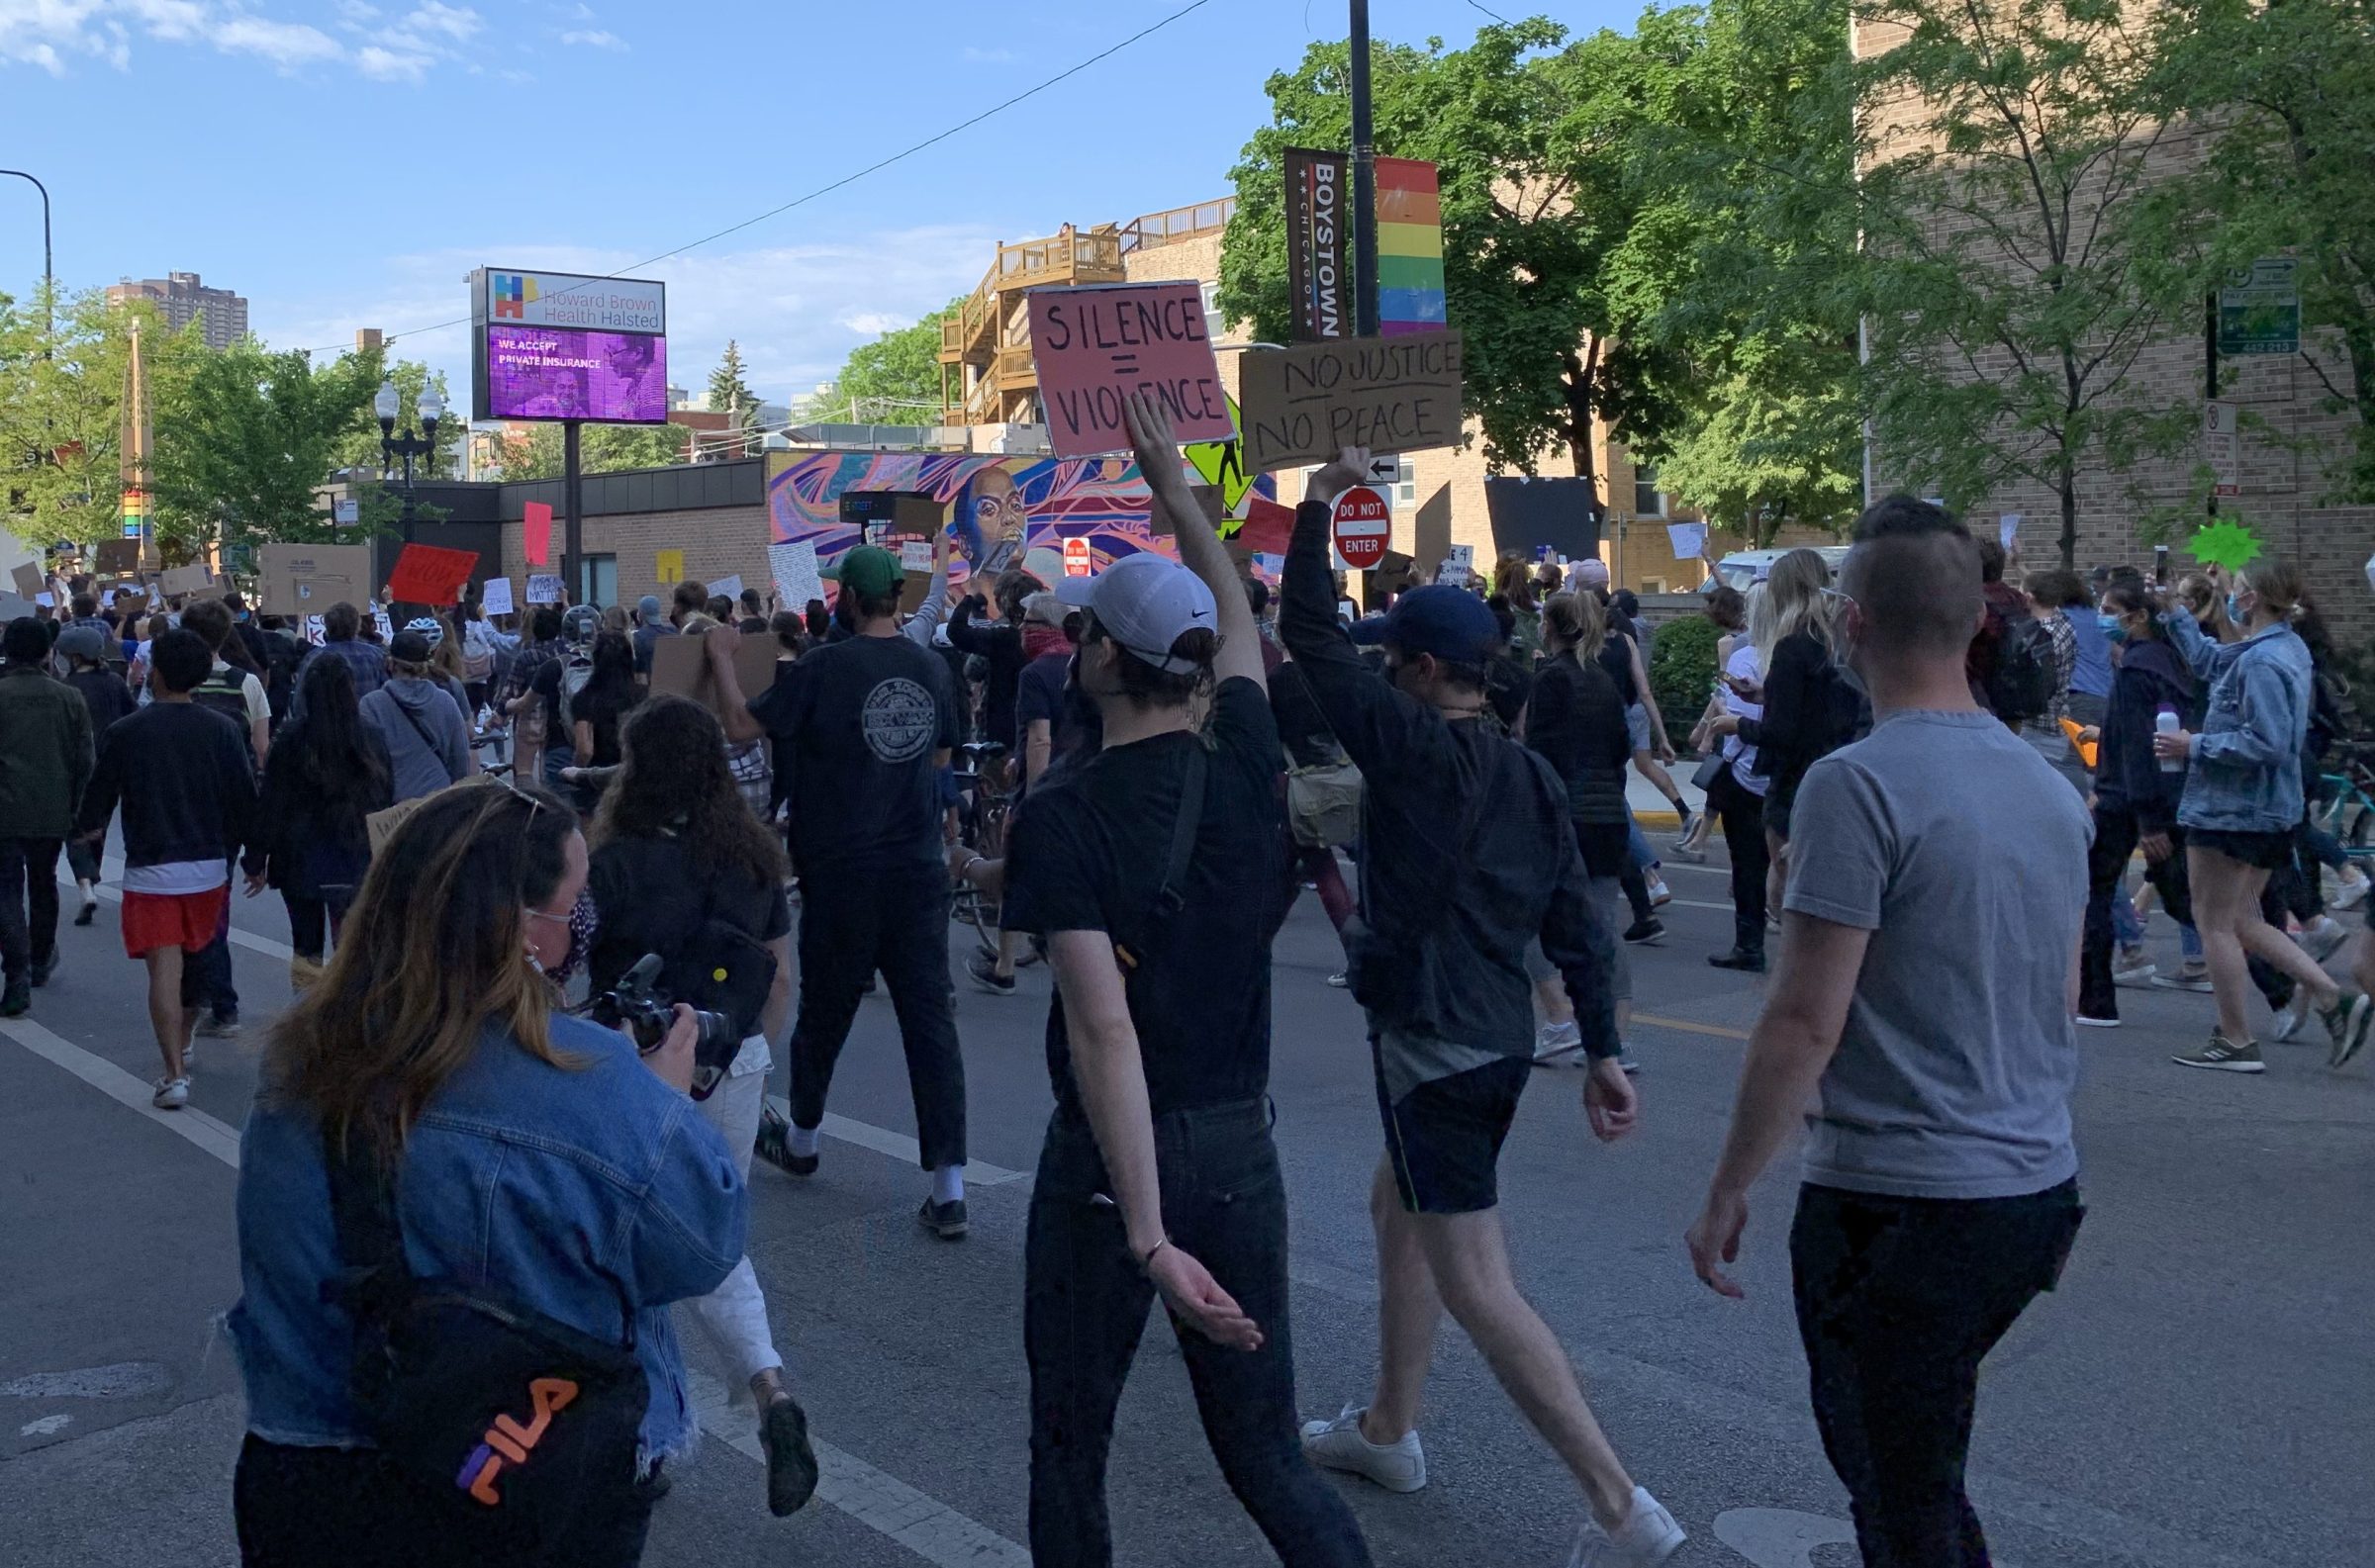 Protesters marched through Boystown on Monday, June 1, 2020, to protest police brutality against Black people.